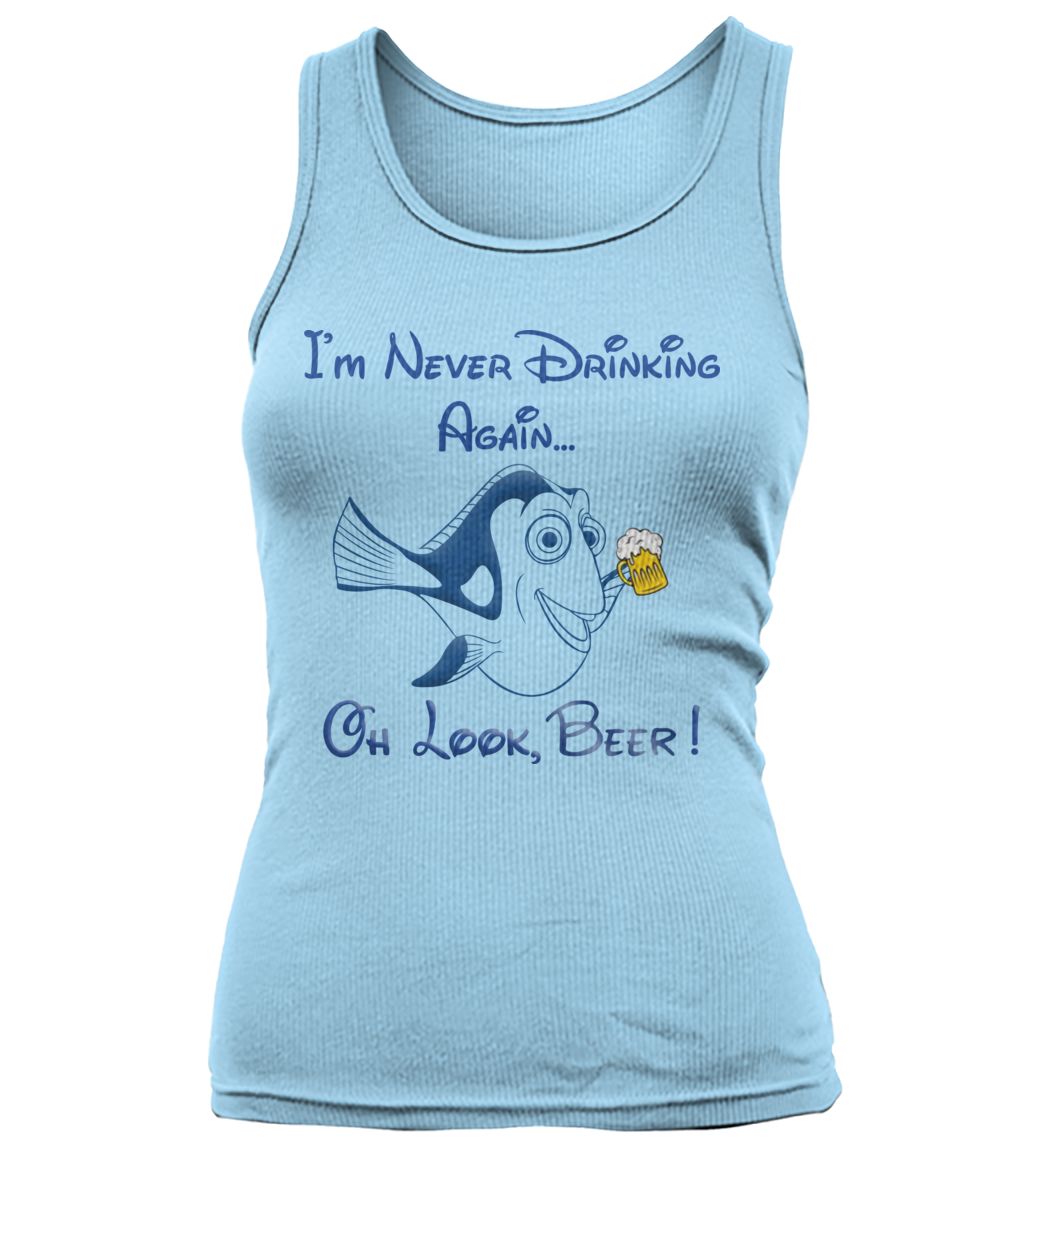 Dory fish I'm never drinking again oh look beer women's tank top